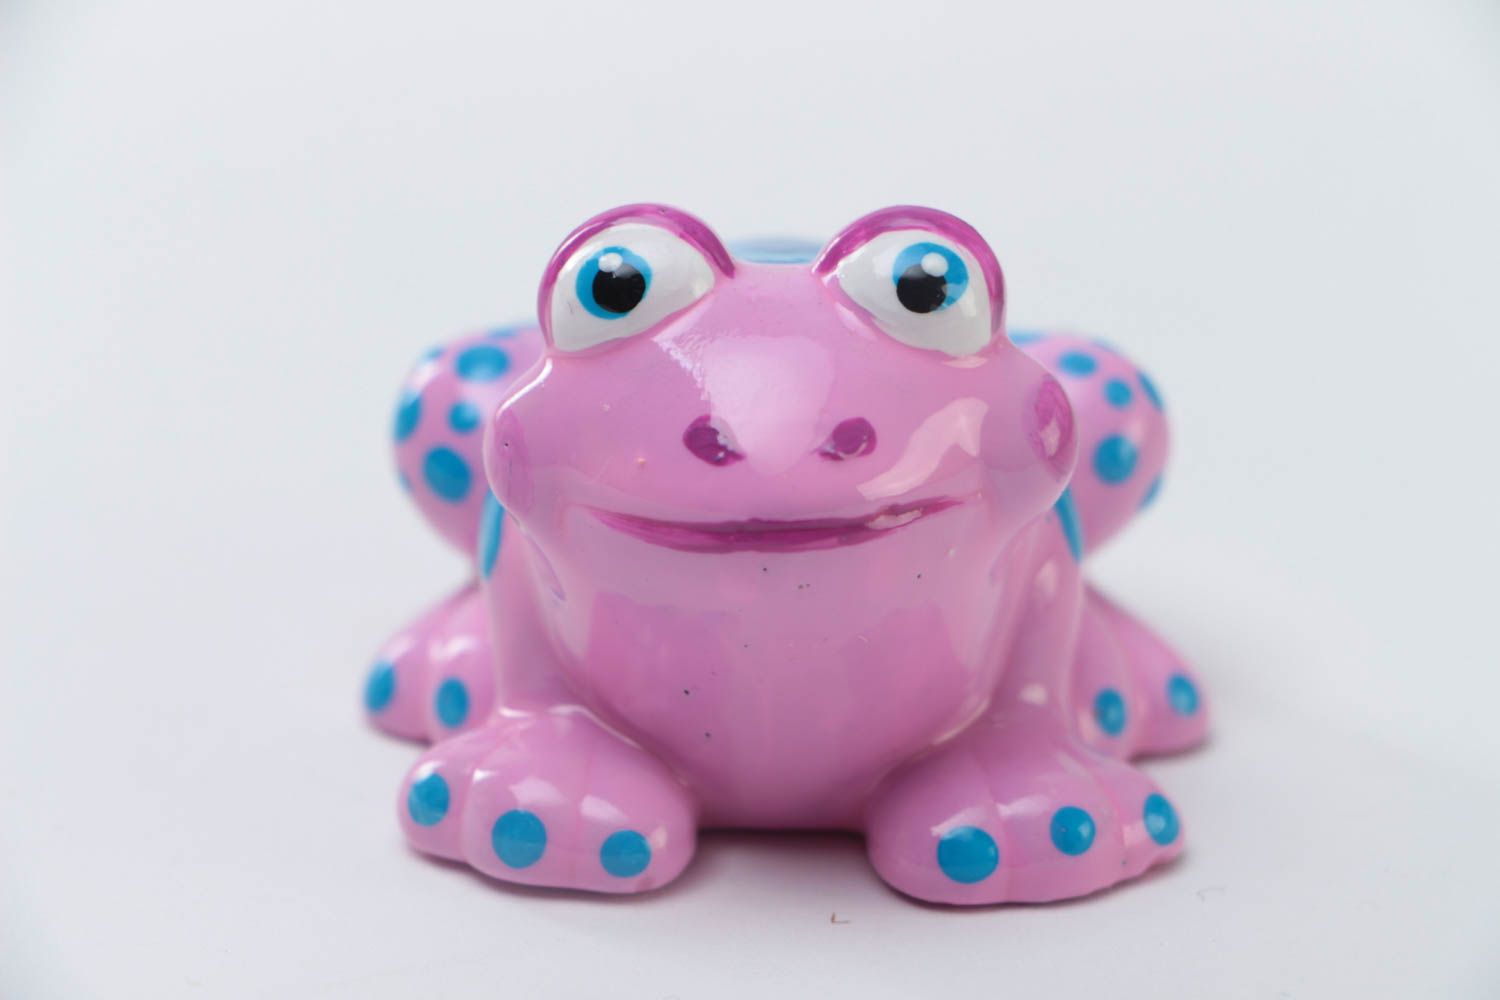 Beautiful painted pink plaster figurine of frog hand made interior decor photo 2